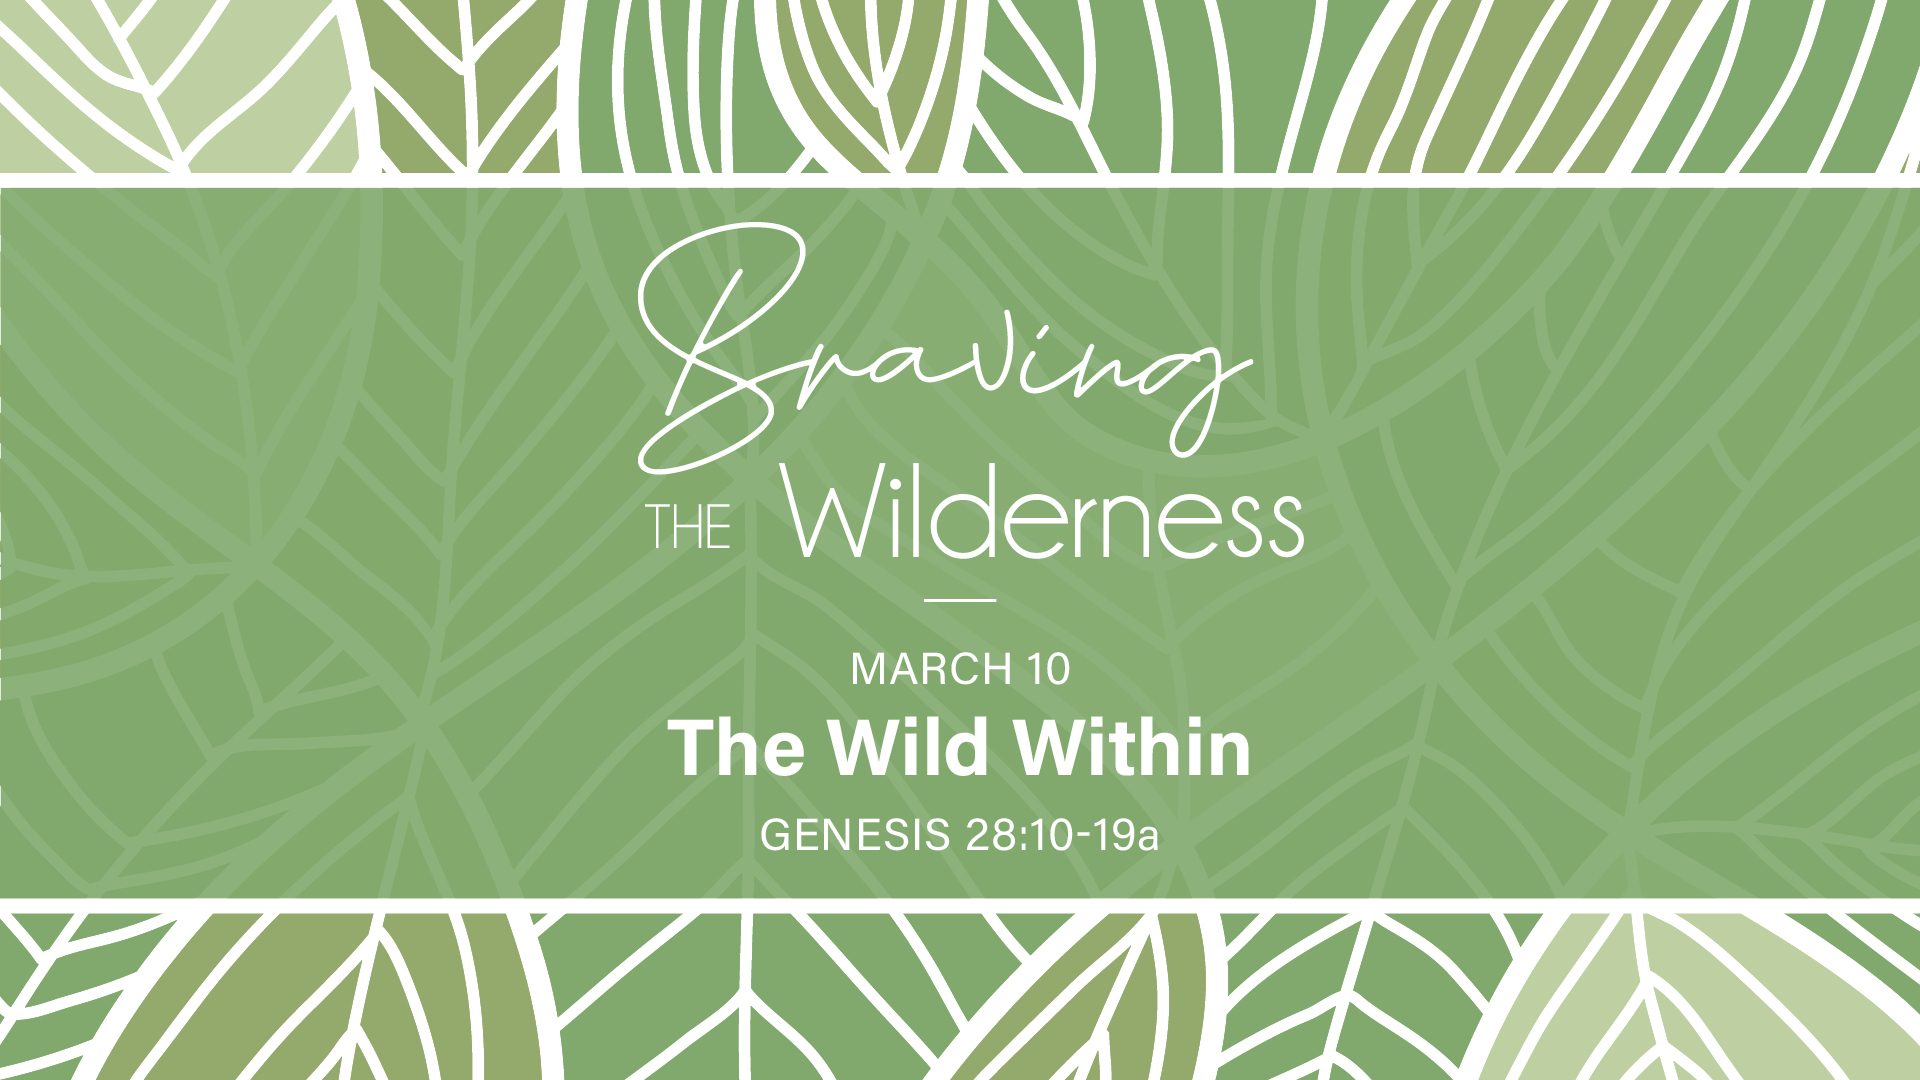 Braving the Wilderness: The Wild Within